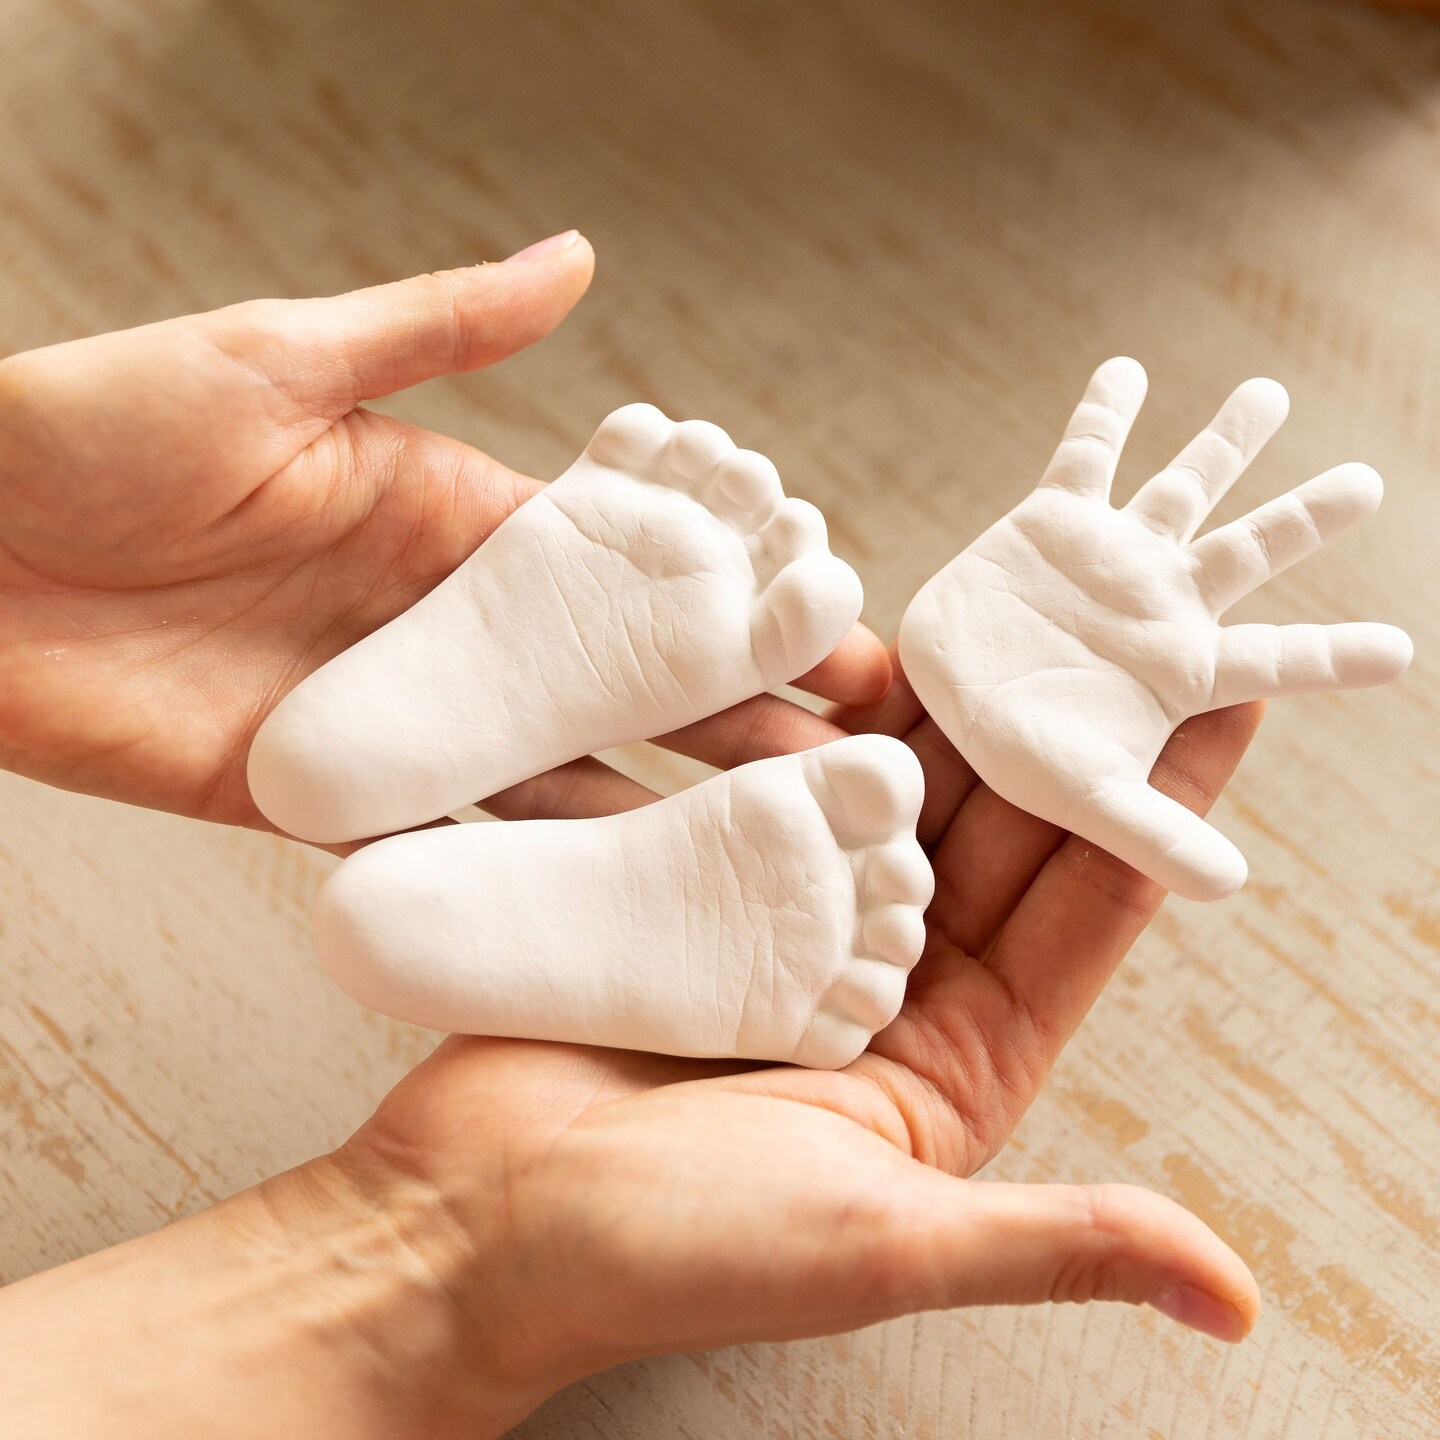 Luna Bean Keepsake Hands Casting KIT - Family Hand Molding | Clasped Group  Hand Sculpture KIT & Molding KIT - Crafts for Adults & Kids DIY (Cast up to